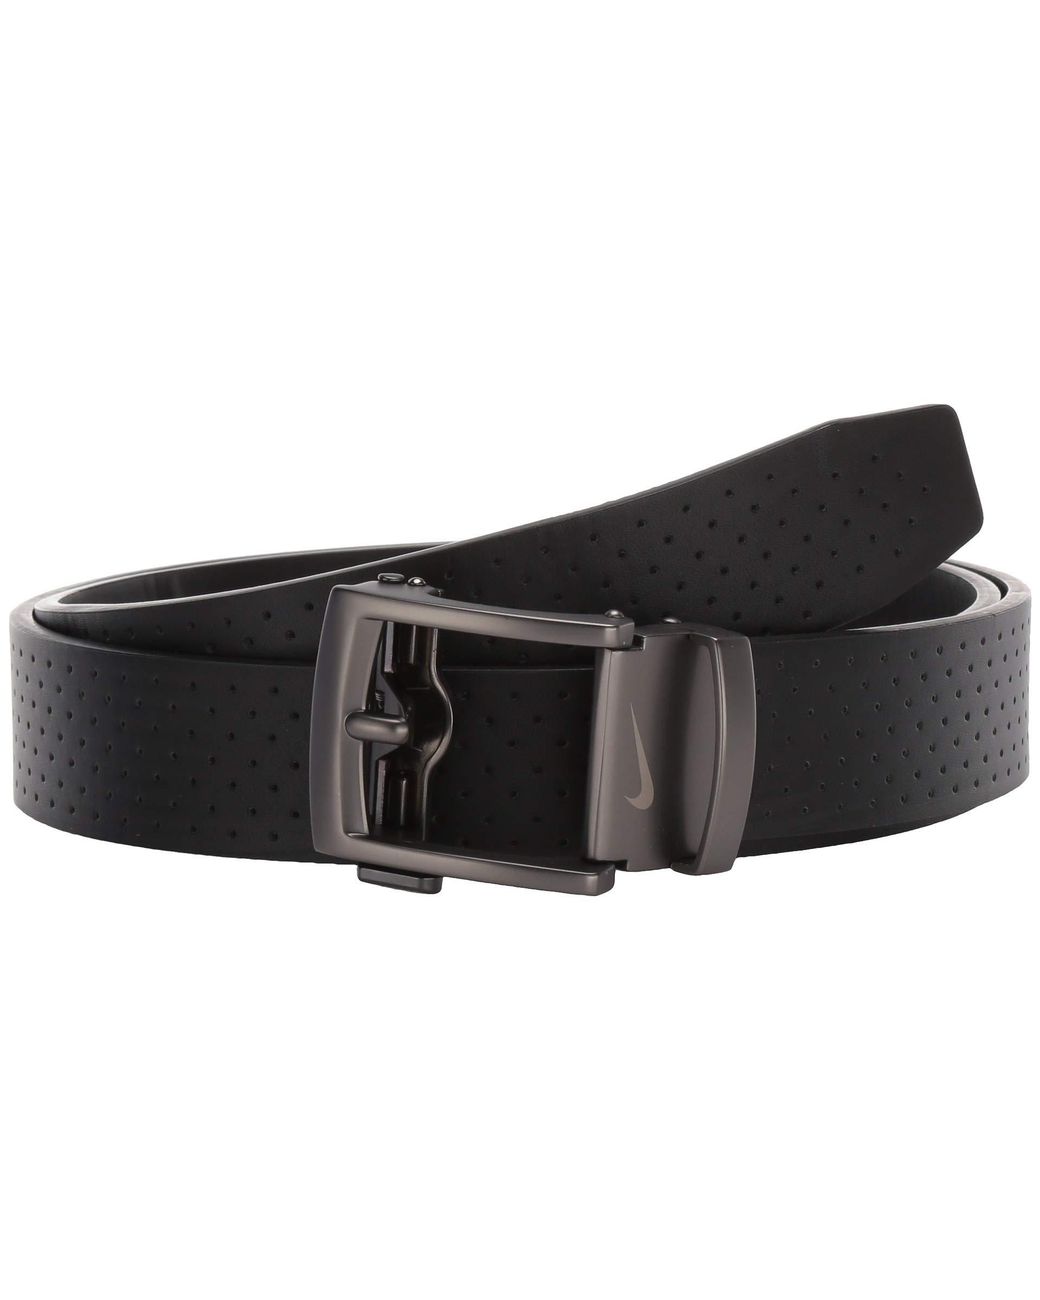 Nike Acufit Perforated Texture Belt in Black for Men - Lyst